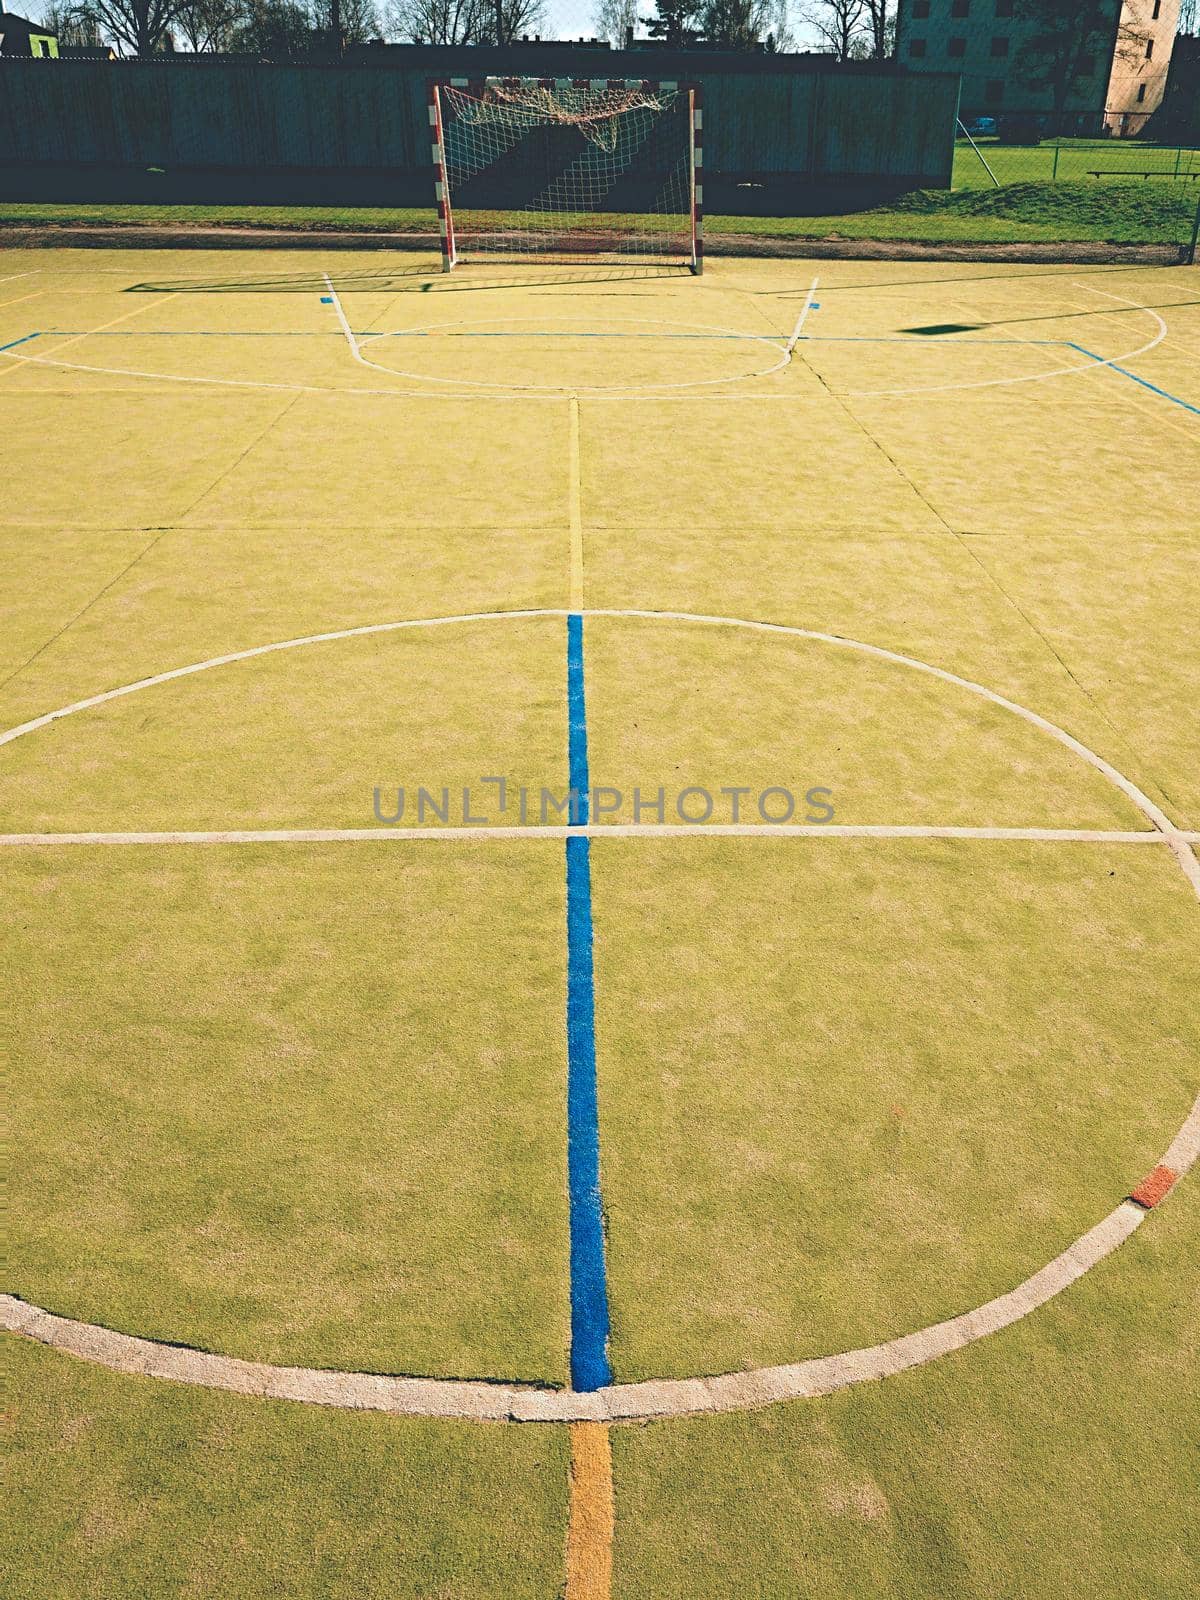 Circle in middle of court. Empty outdoor handball playground, plastic light green surface on ground and white blue bounds lines.